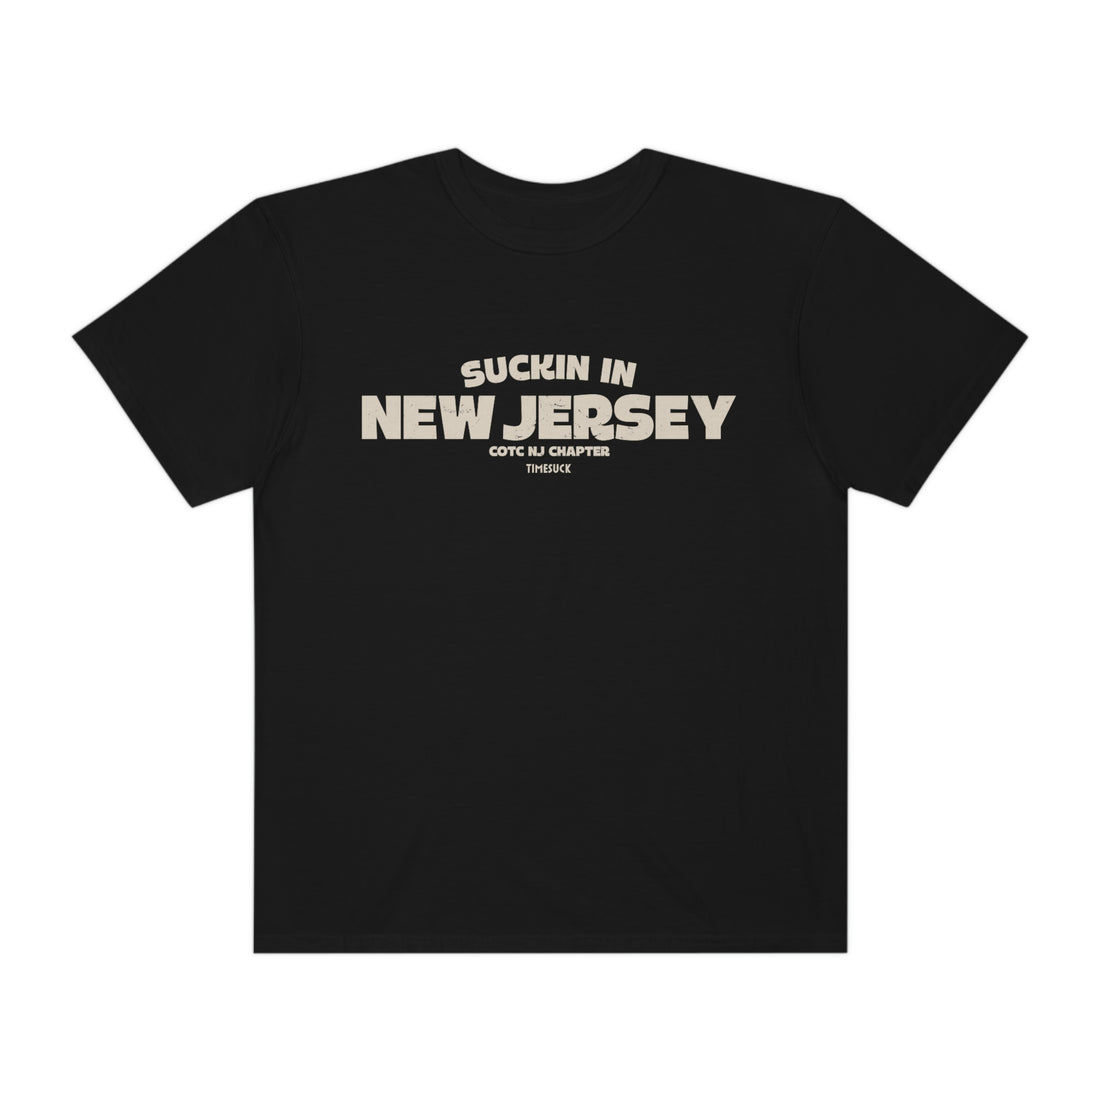 New Jersey Cult Tee